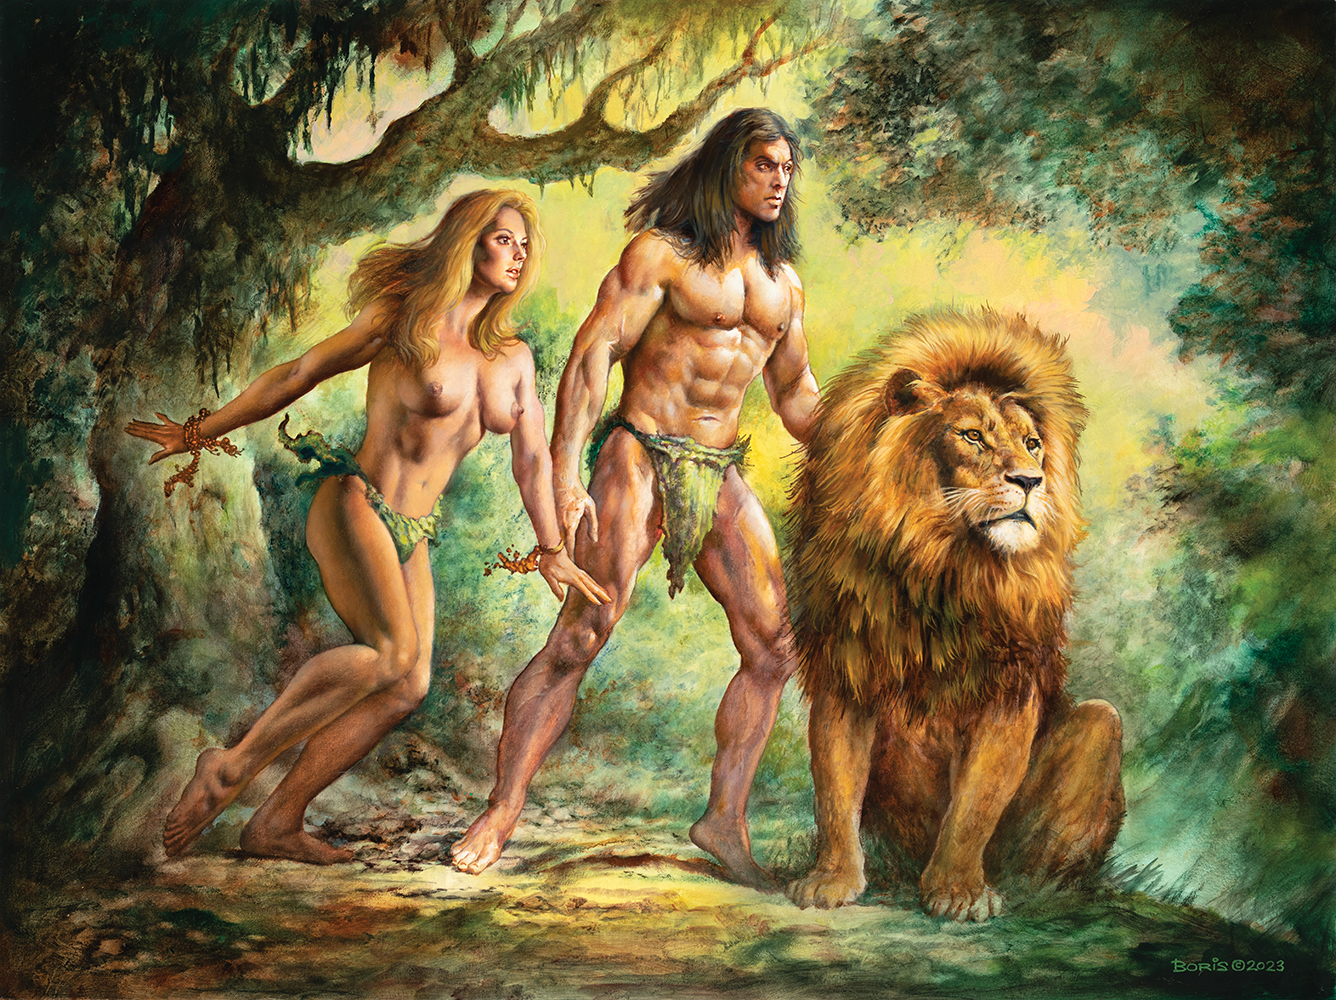 A fine art print of a man and a woman in the jungle with a beautiful lioness.